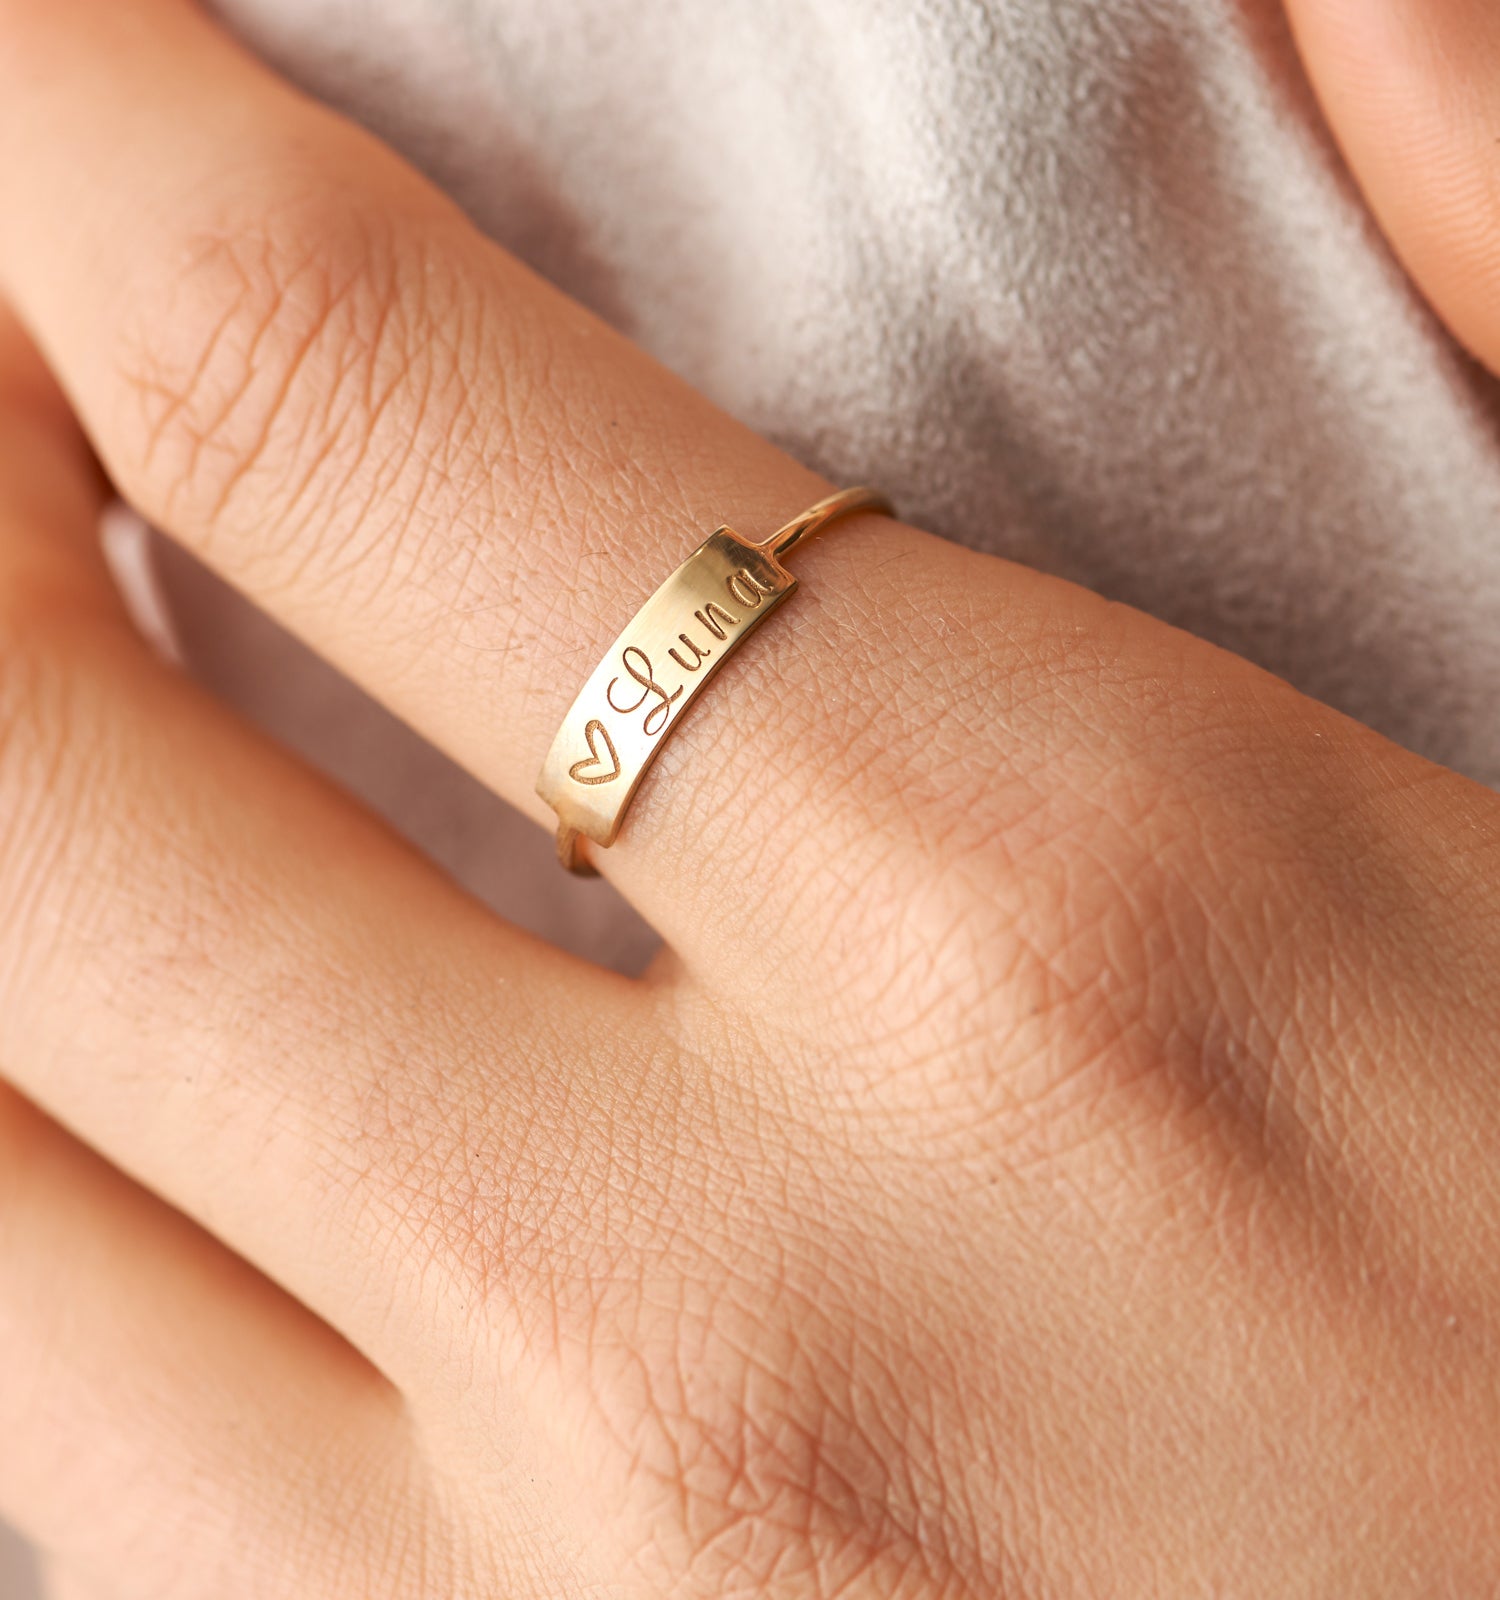 Personalised Name Ring Silver or 9ct Gold, Personalised Rings